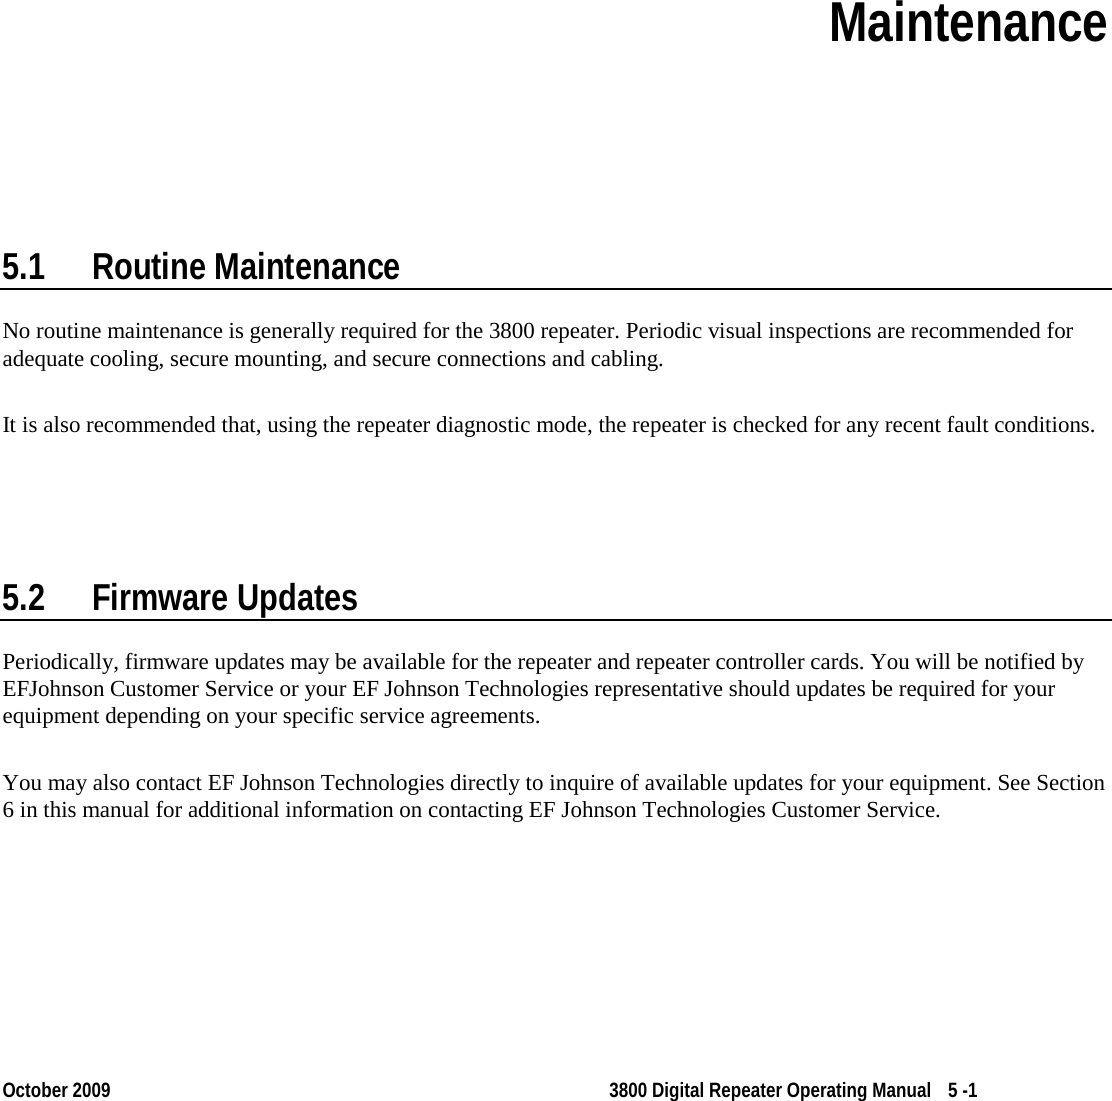  October 2009 3800 Digital Repeater Operating Manual 5 -1 Section 5 Section 5Maintenance  5.1 Routine Maintenance No routine maintenance is generally required for the 3800 repeater. Periodic visual inspections are recommended for adequate cooling, secure mounting, and secure connections and cabling. It is also recommended that, using the repeater diagnostic mode, the repeater is checked for any recent fault conditions. 5.2 Firmware Updates Periodically, firmware updates may be available for the repeater and repeater controller cards. You will be notified by EFJohnson Customer Service or your EF Johnson Technologies representative should updates be required for your equipment depending on your specific service agreements. You may also contact EF Johnson Technologies directly to inquire of available updates for your equipment. See Section 6 in this manual for additional information on contacting EF Johnson Technologies Customer Service. 